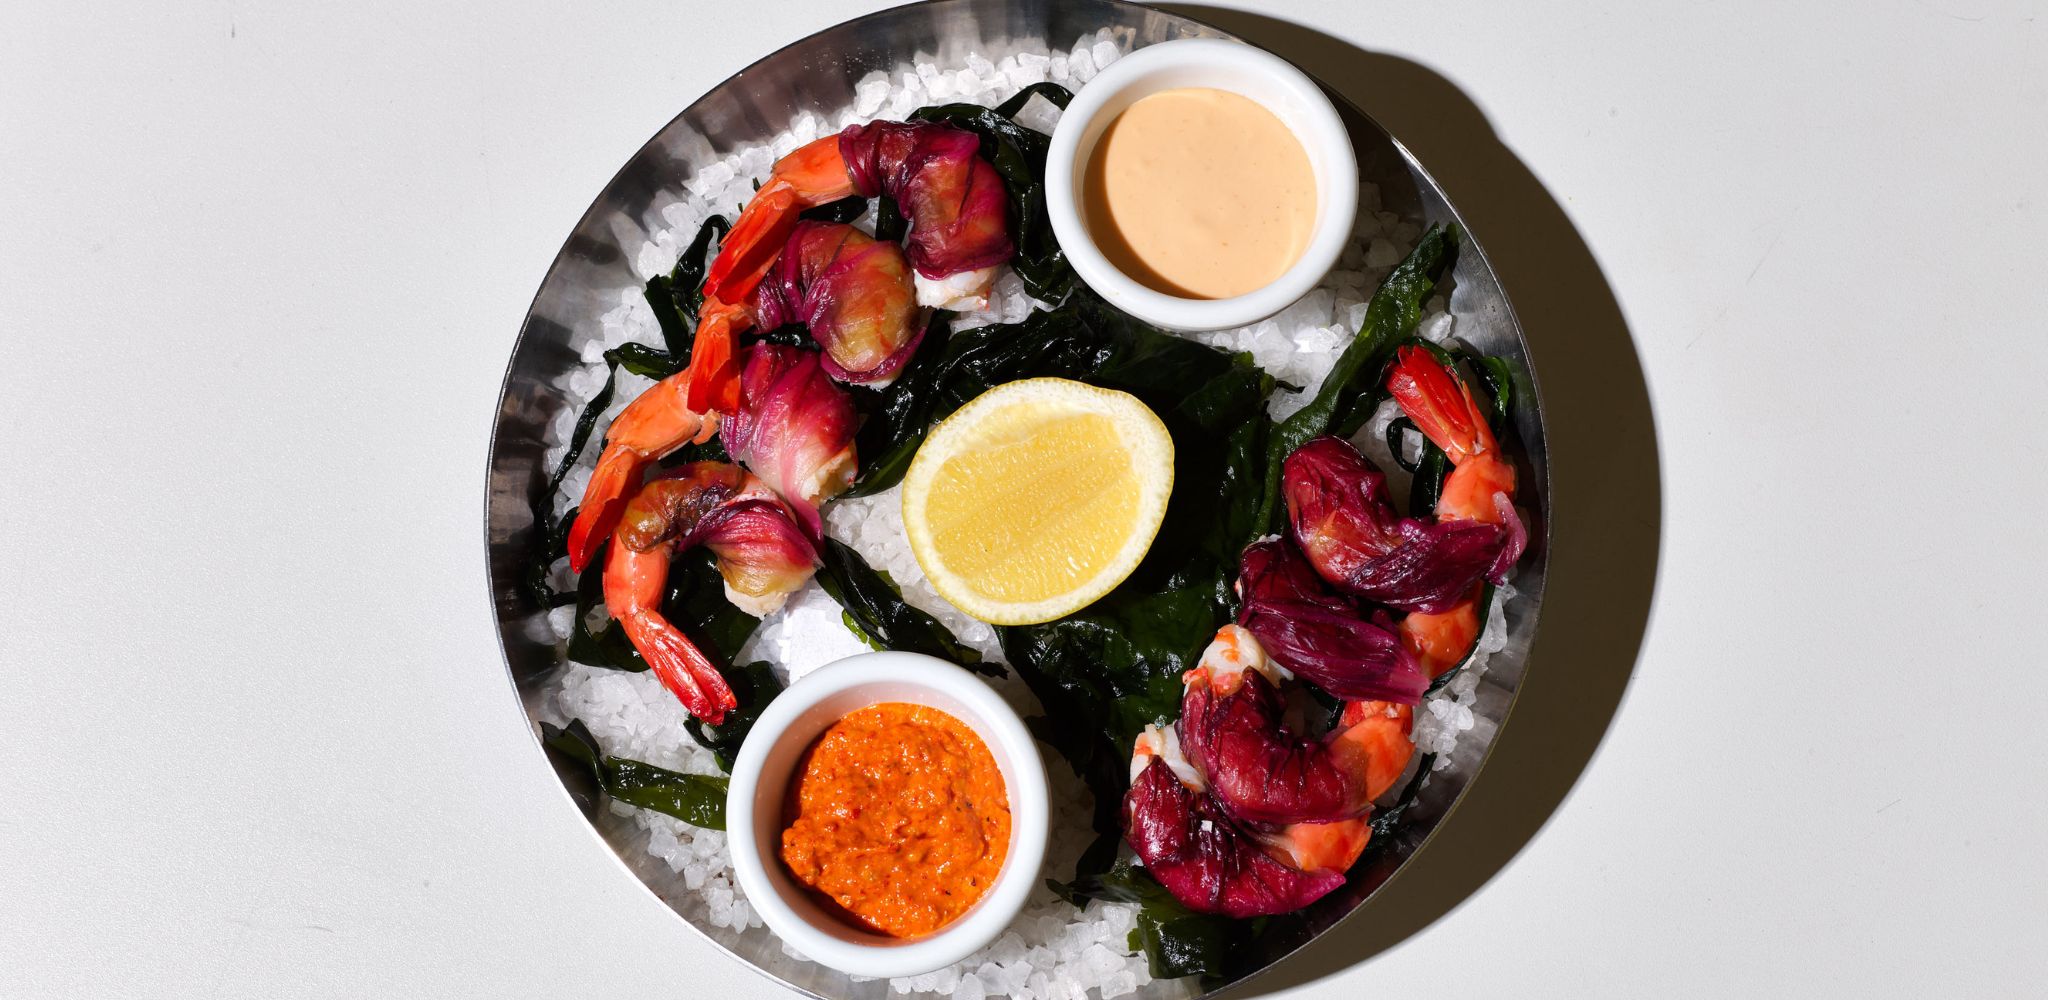 Spencer Gulf King prawns, radicchio, romesco, sauce marie-rose and lemon served on a silver tray on salt and beetroot leaves